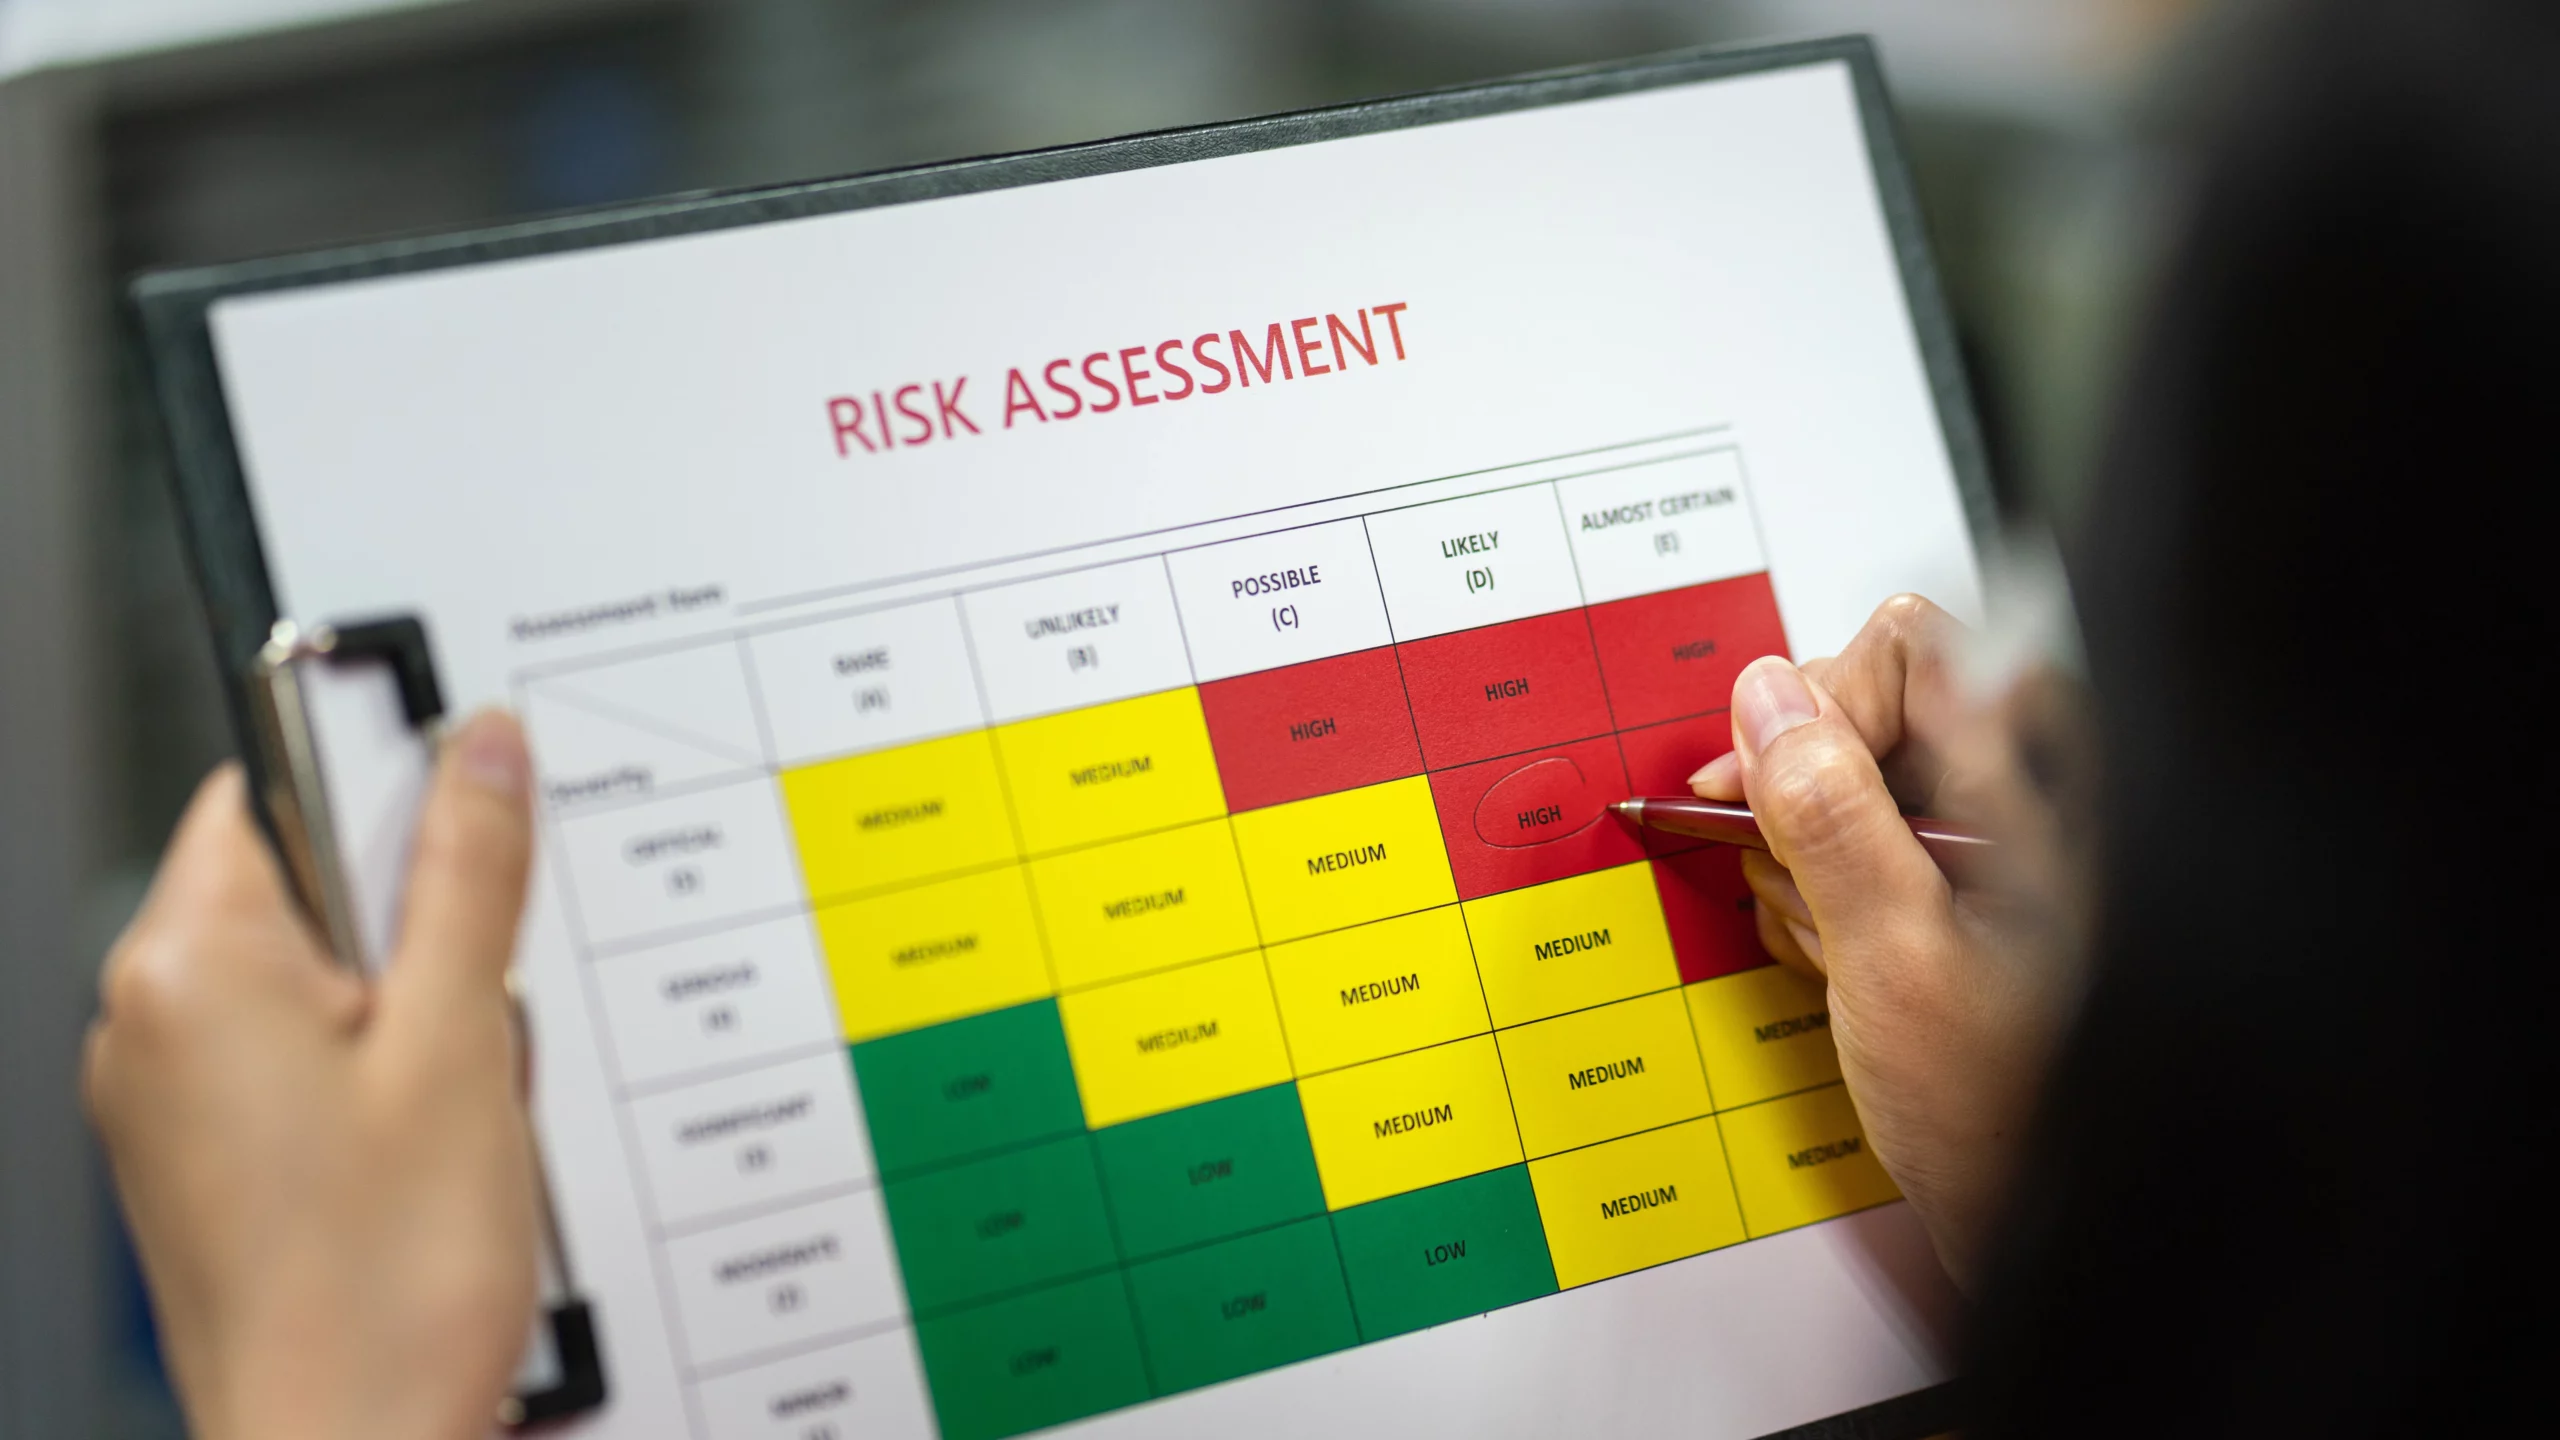 a competent person going through the risk assessment process and deciding on reasonable control measures 